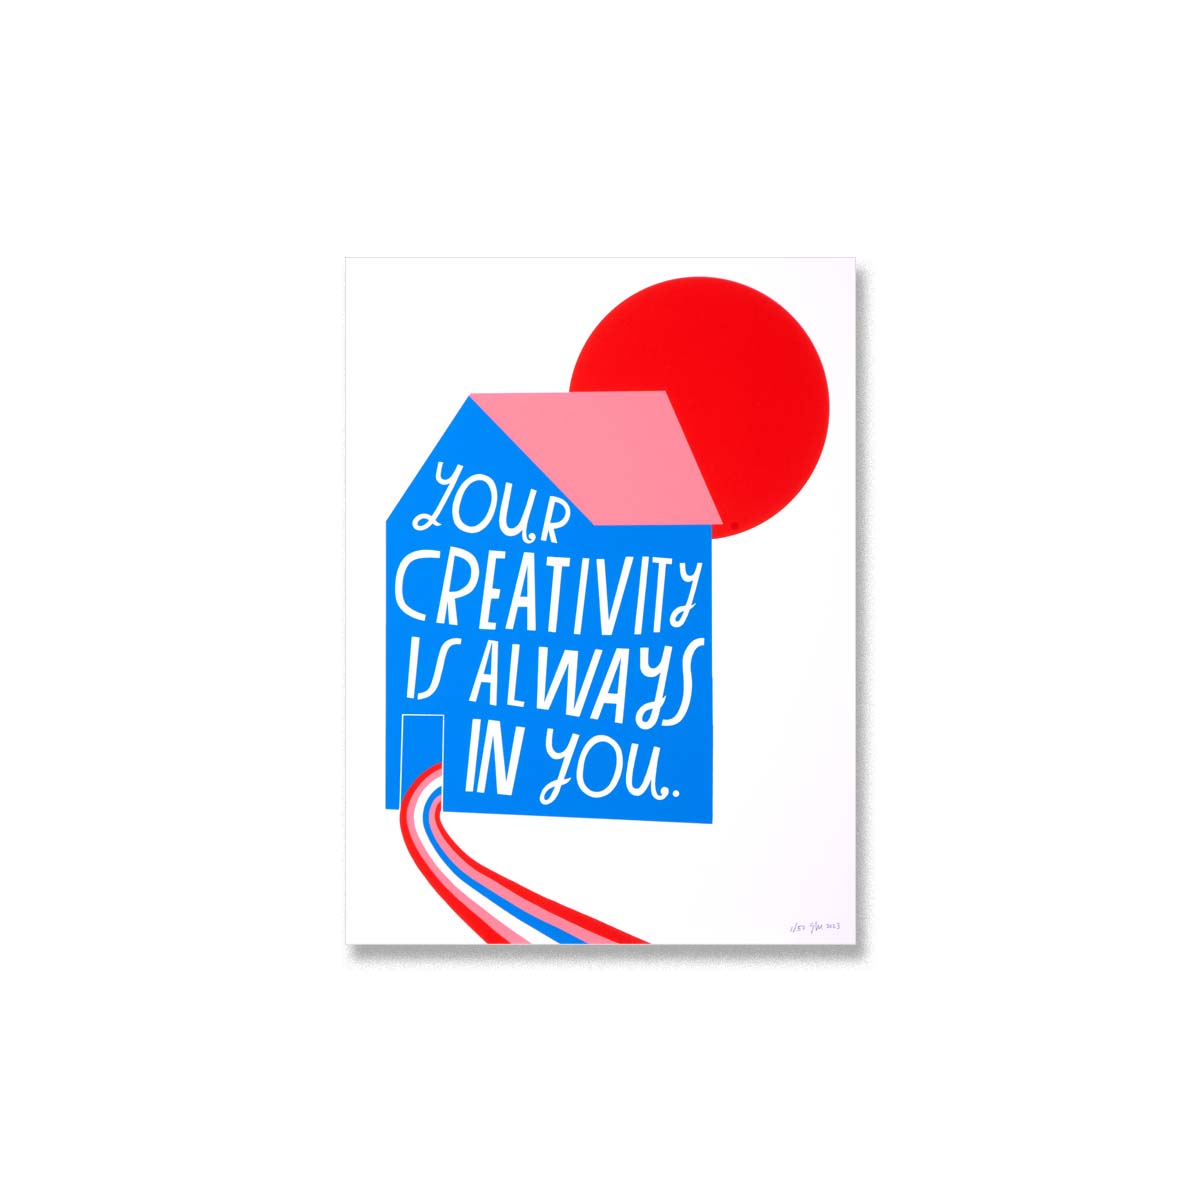 Your Creativity is Always in You - Limited Edition Serigraph